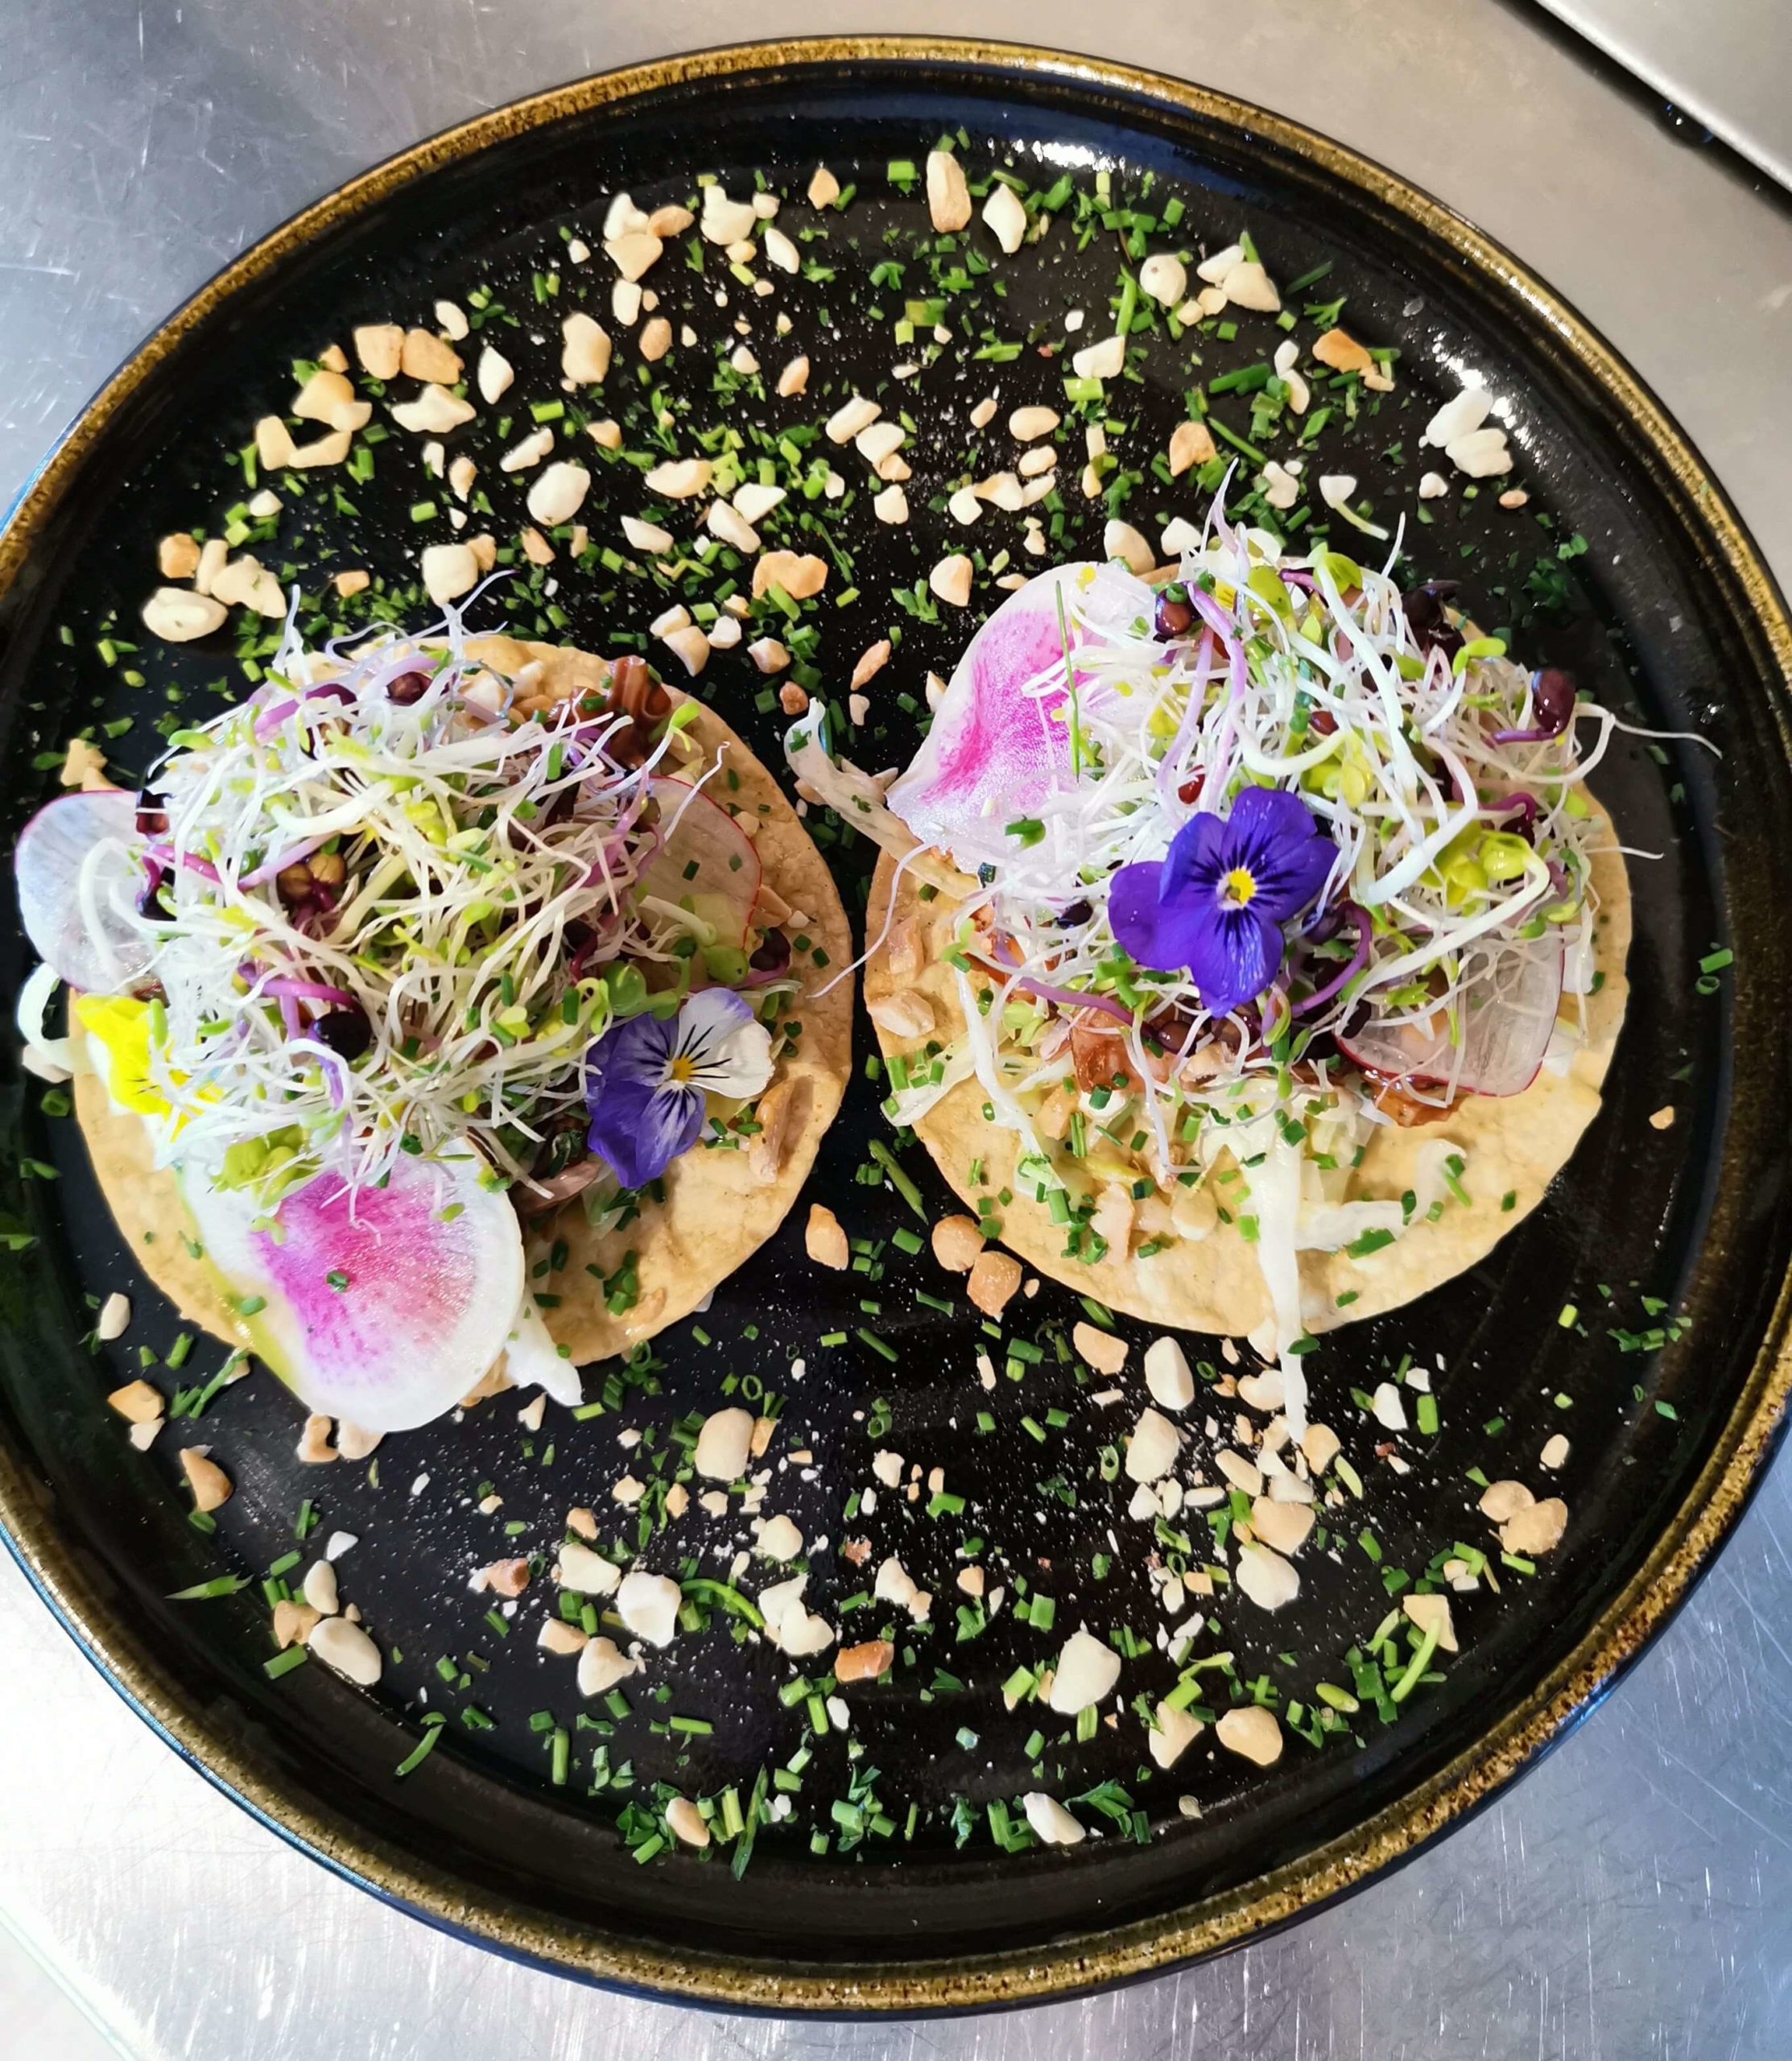 Auckland plant based eatery's vegan jackfruit tostadas, garnished with locally sourced organic micro-greens